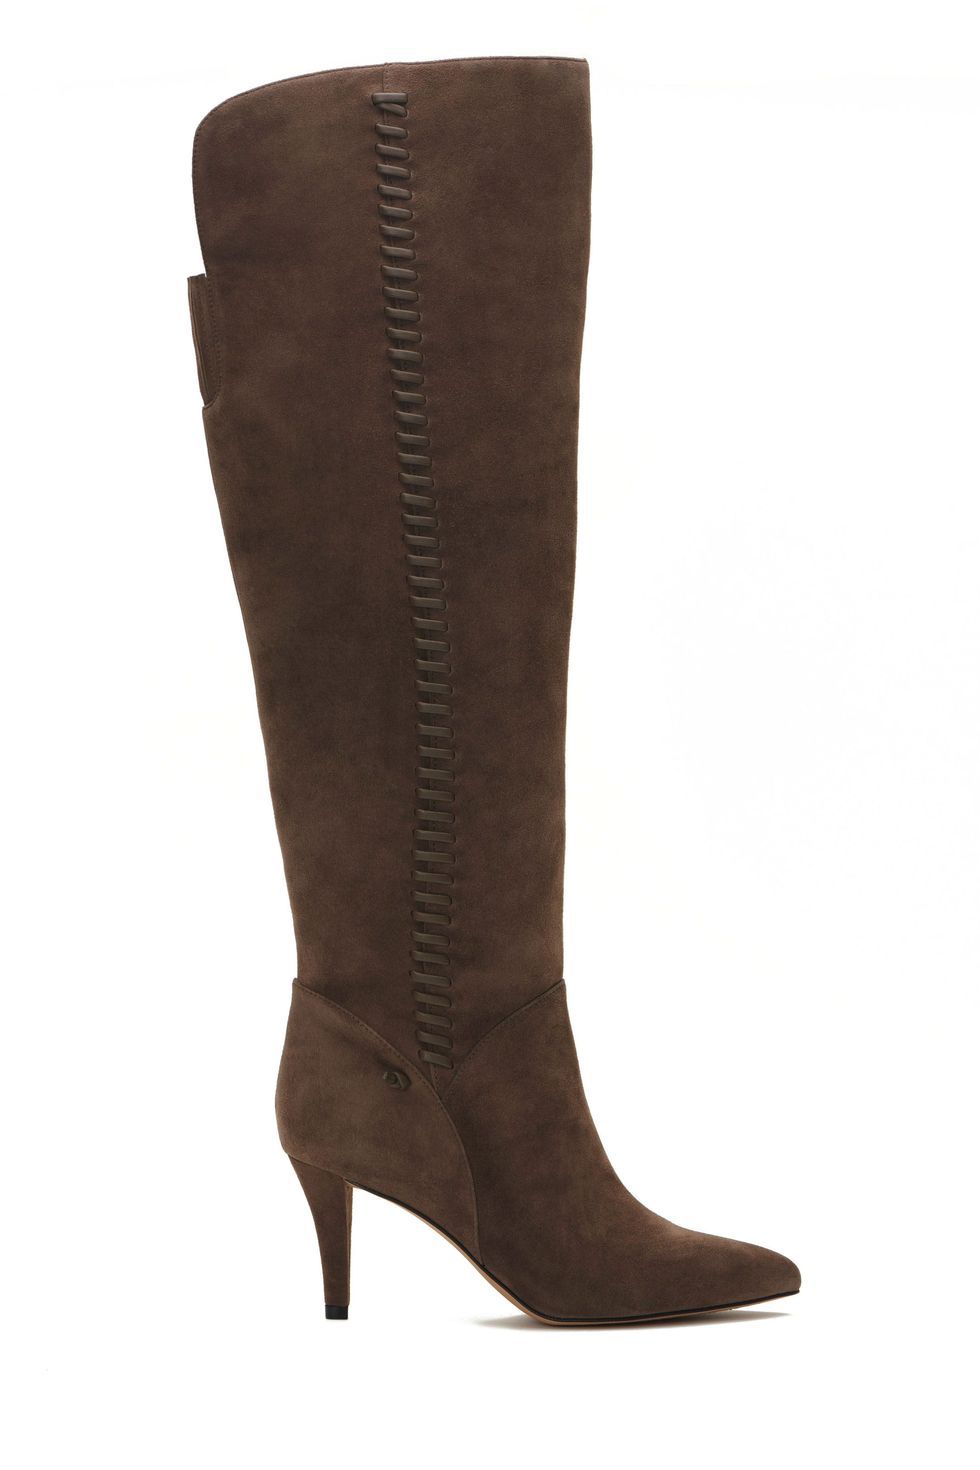 Vince Camuto Seselti Wide-Calf Over The Knee Boot